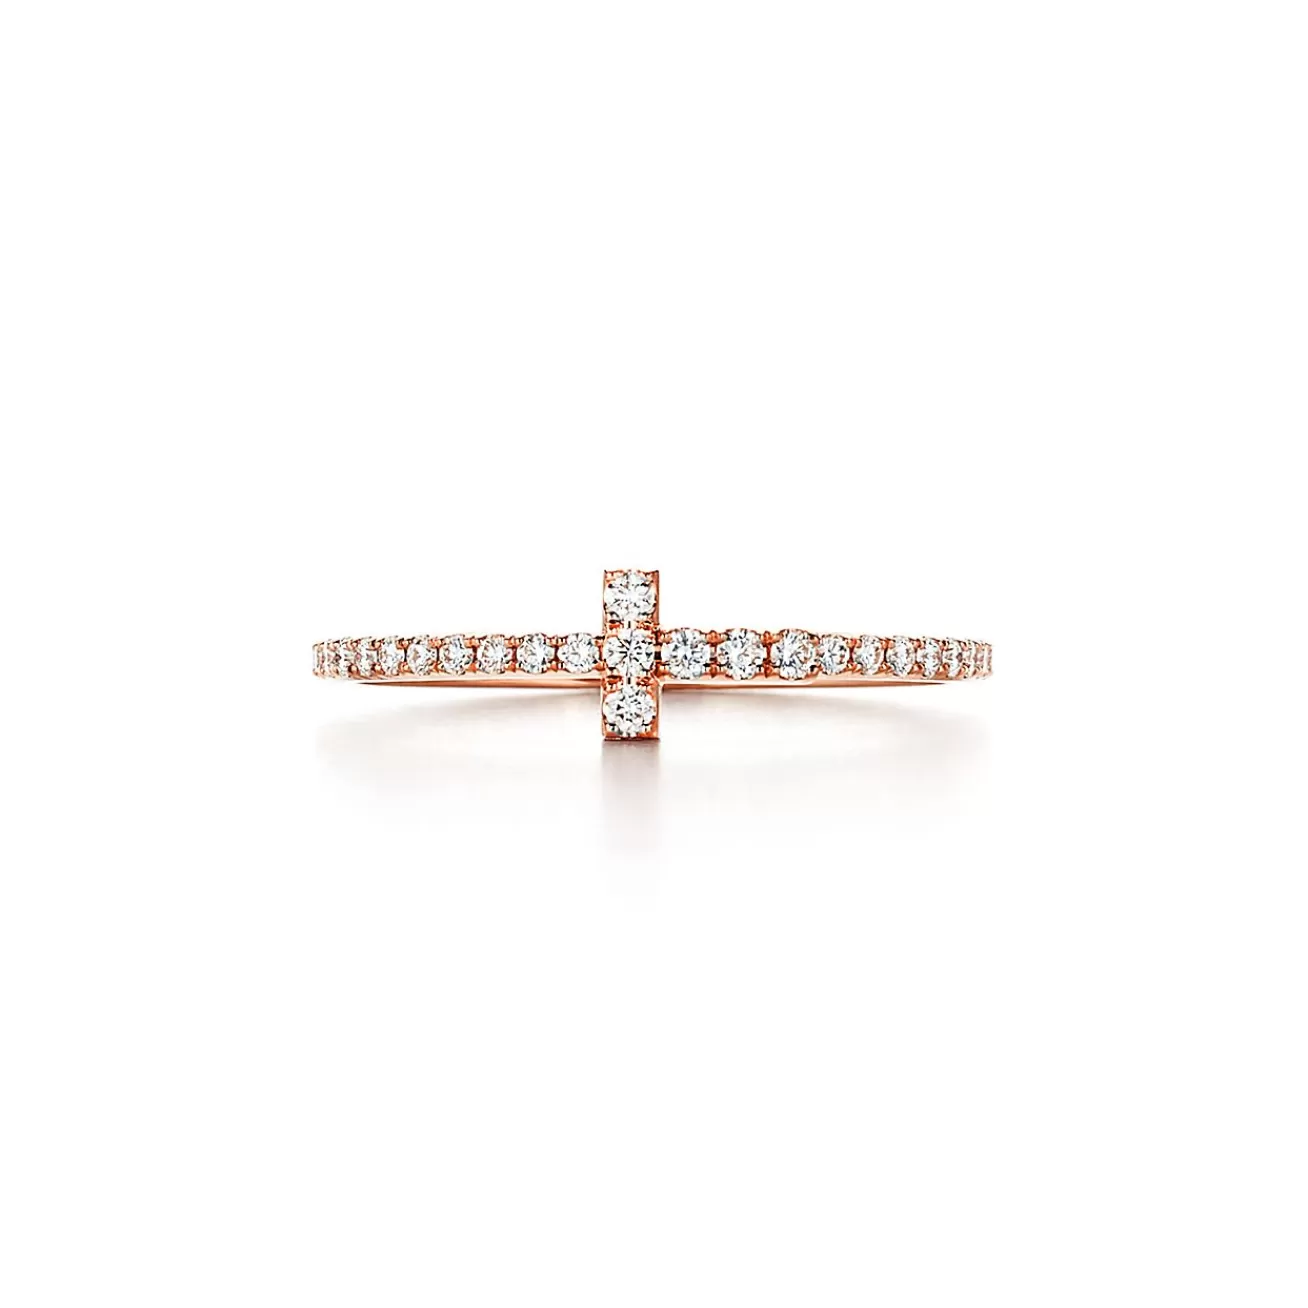 Tiffany & Co. Tiffany T diamond wire band ring in 18k rose gold. | ^ Rings | Men's Jewelry